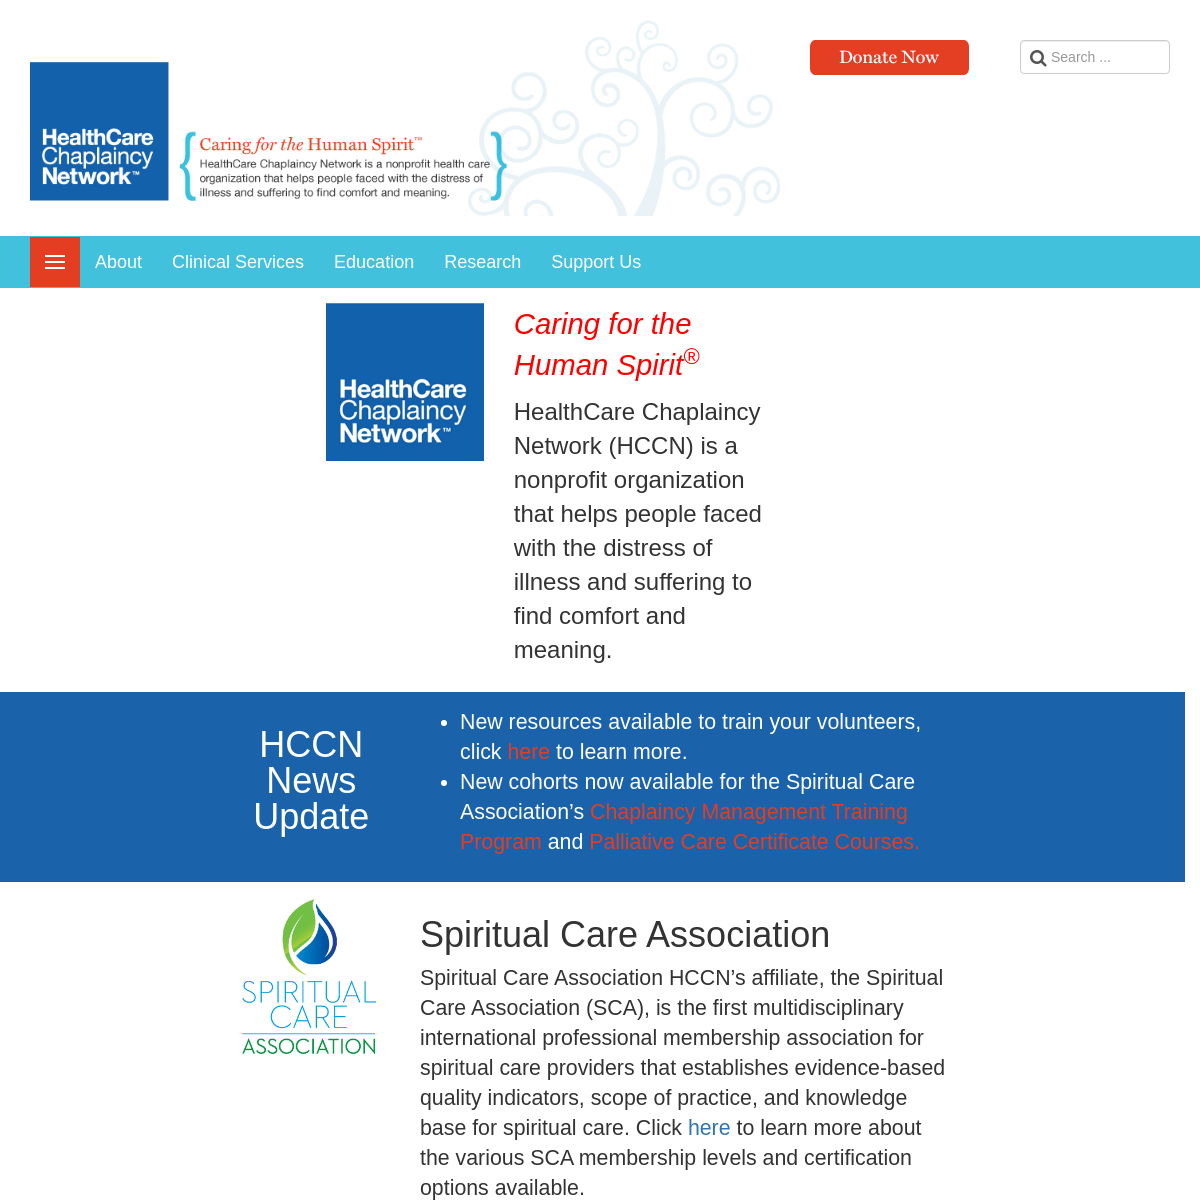 Spiritual and Palliative Care Specialists - HealthCare Chaplaincy